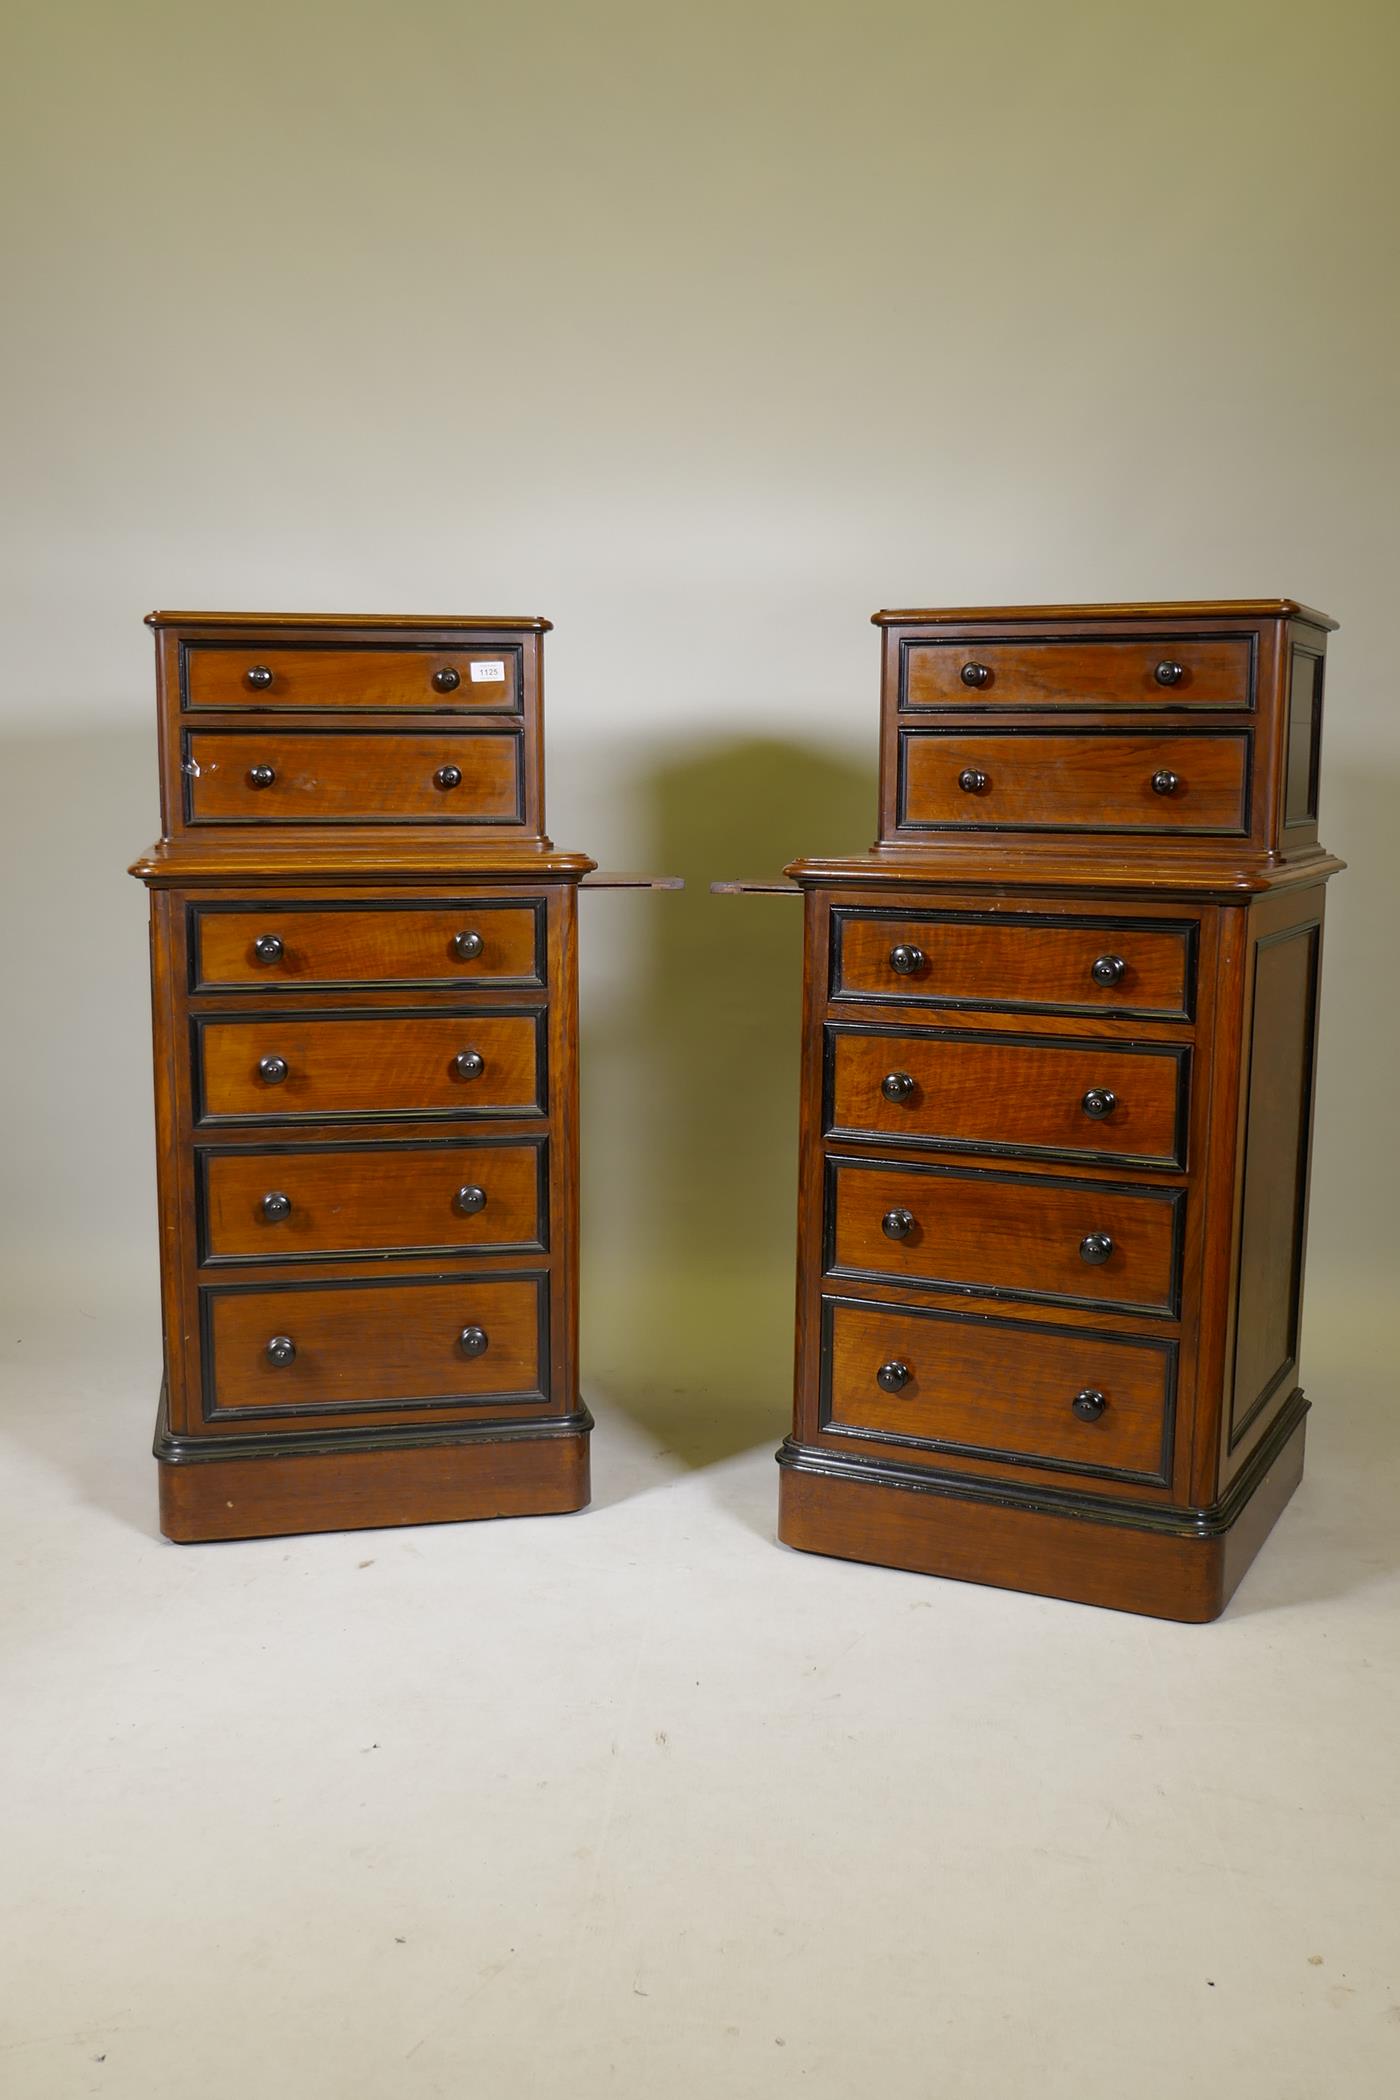 A pair of C19th walnut cabinets with ebony mouldings, one with six drawers, the other two drawers